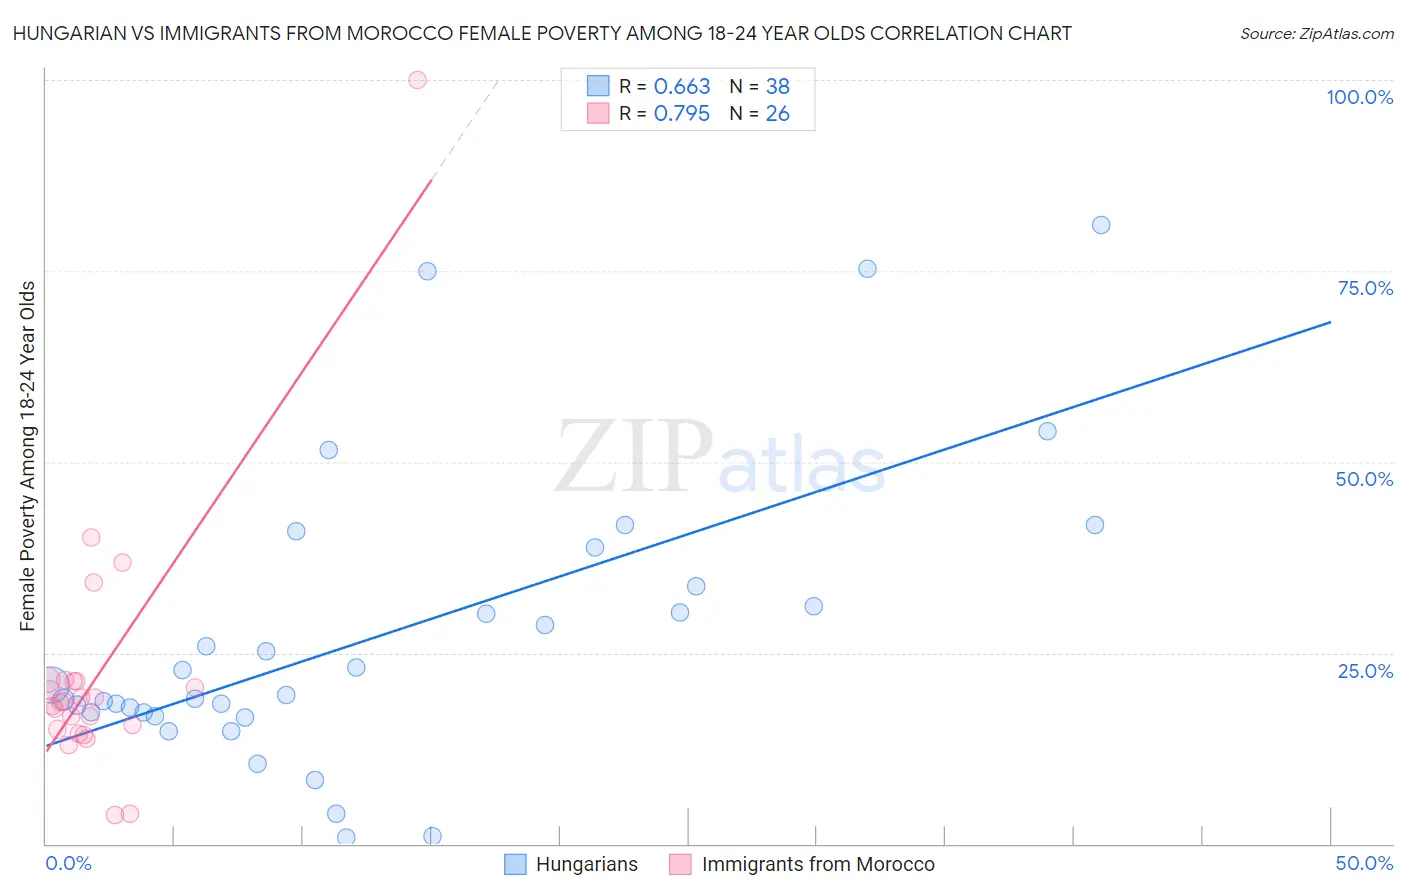 Hungarian vs Immigrants from Morocco Female Poverty Among 18-24 Year Olds